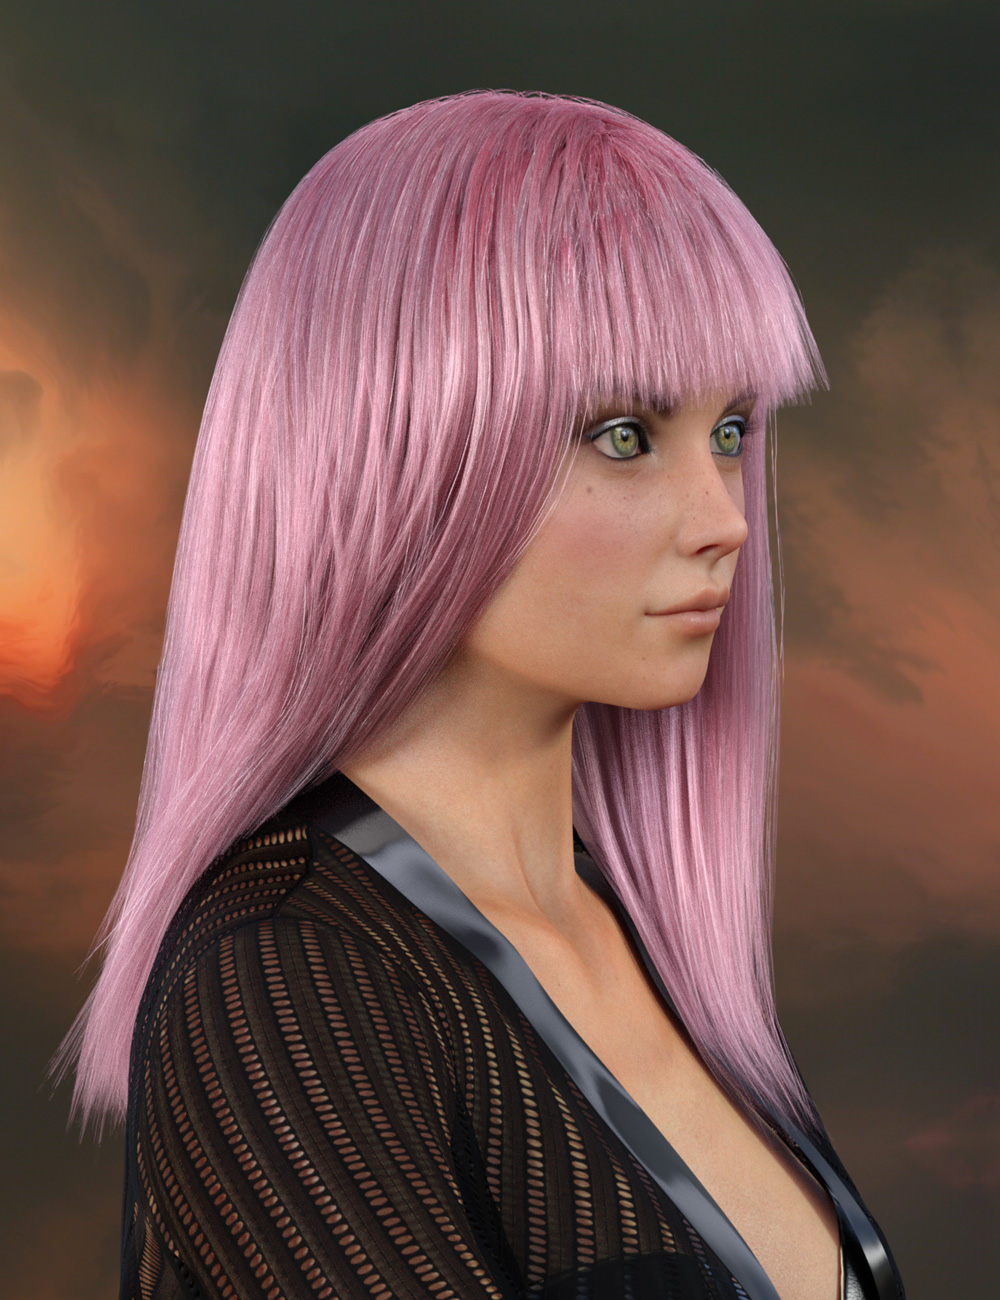 Hoku Hair for Genesis 8 and 8.1 by: Prae, 3D Models by Daz 3D